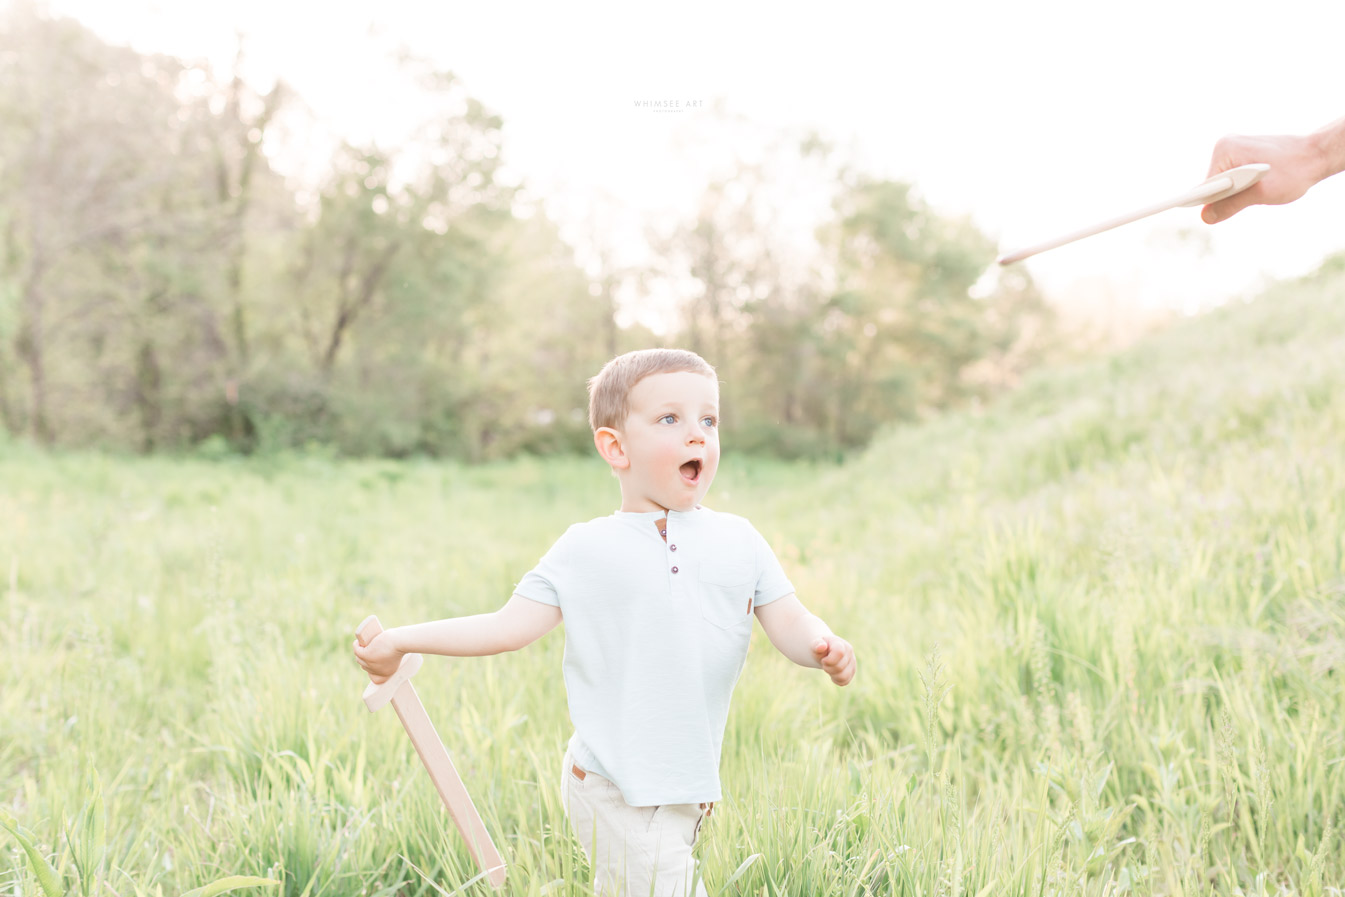 Light and Airy Spring Family Session | Roanoke Family Photographer | Whimsee Art Photography